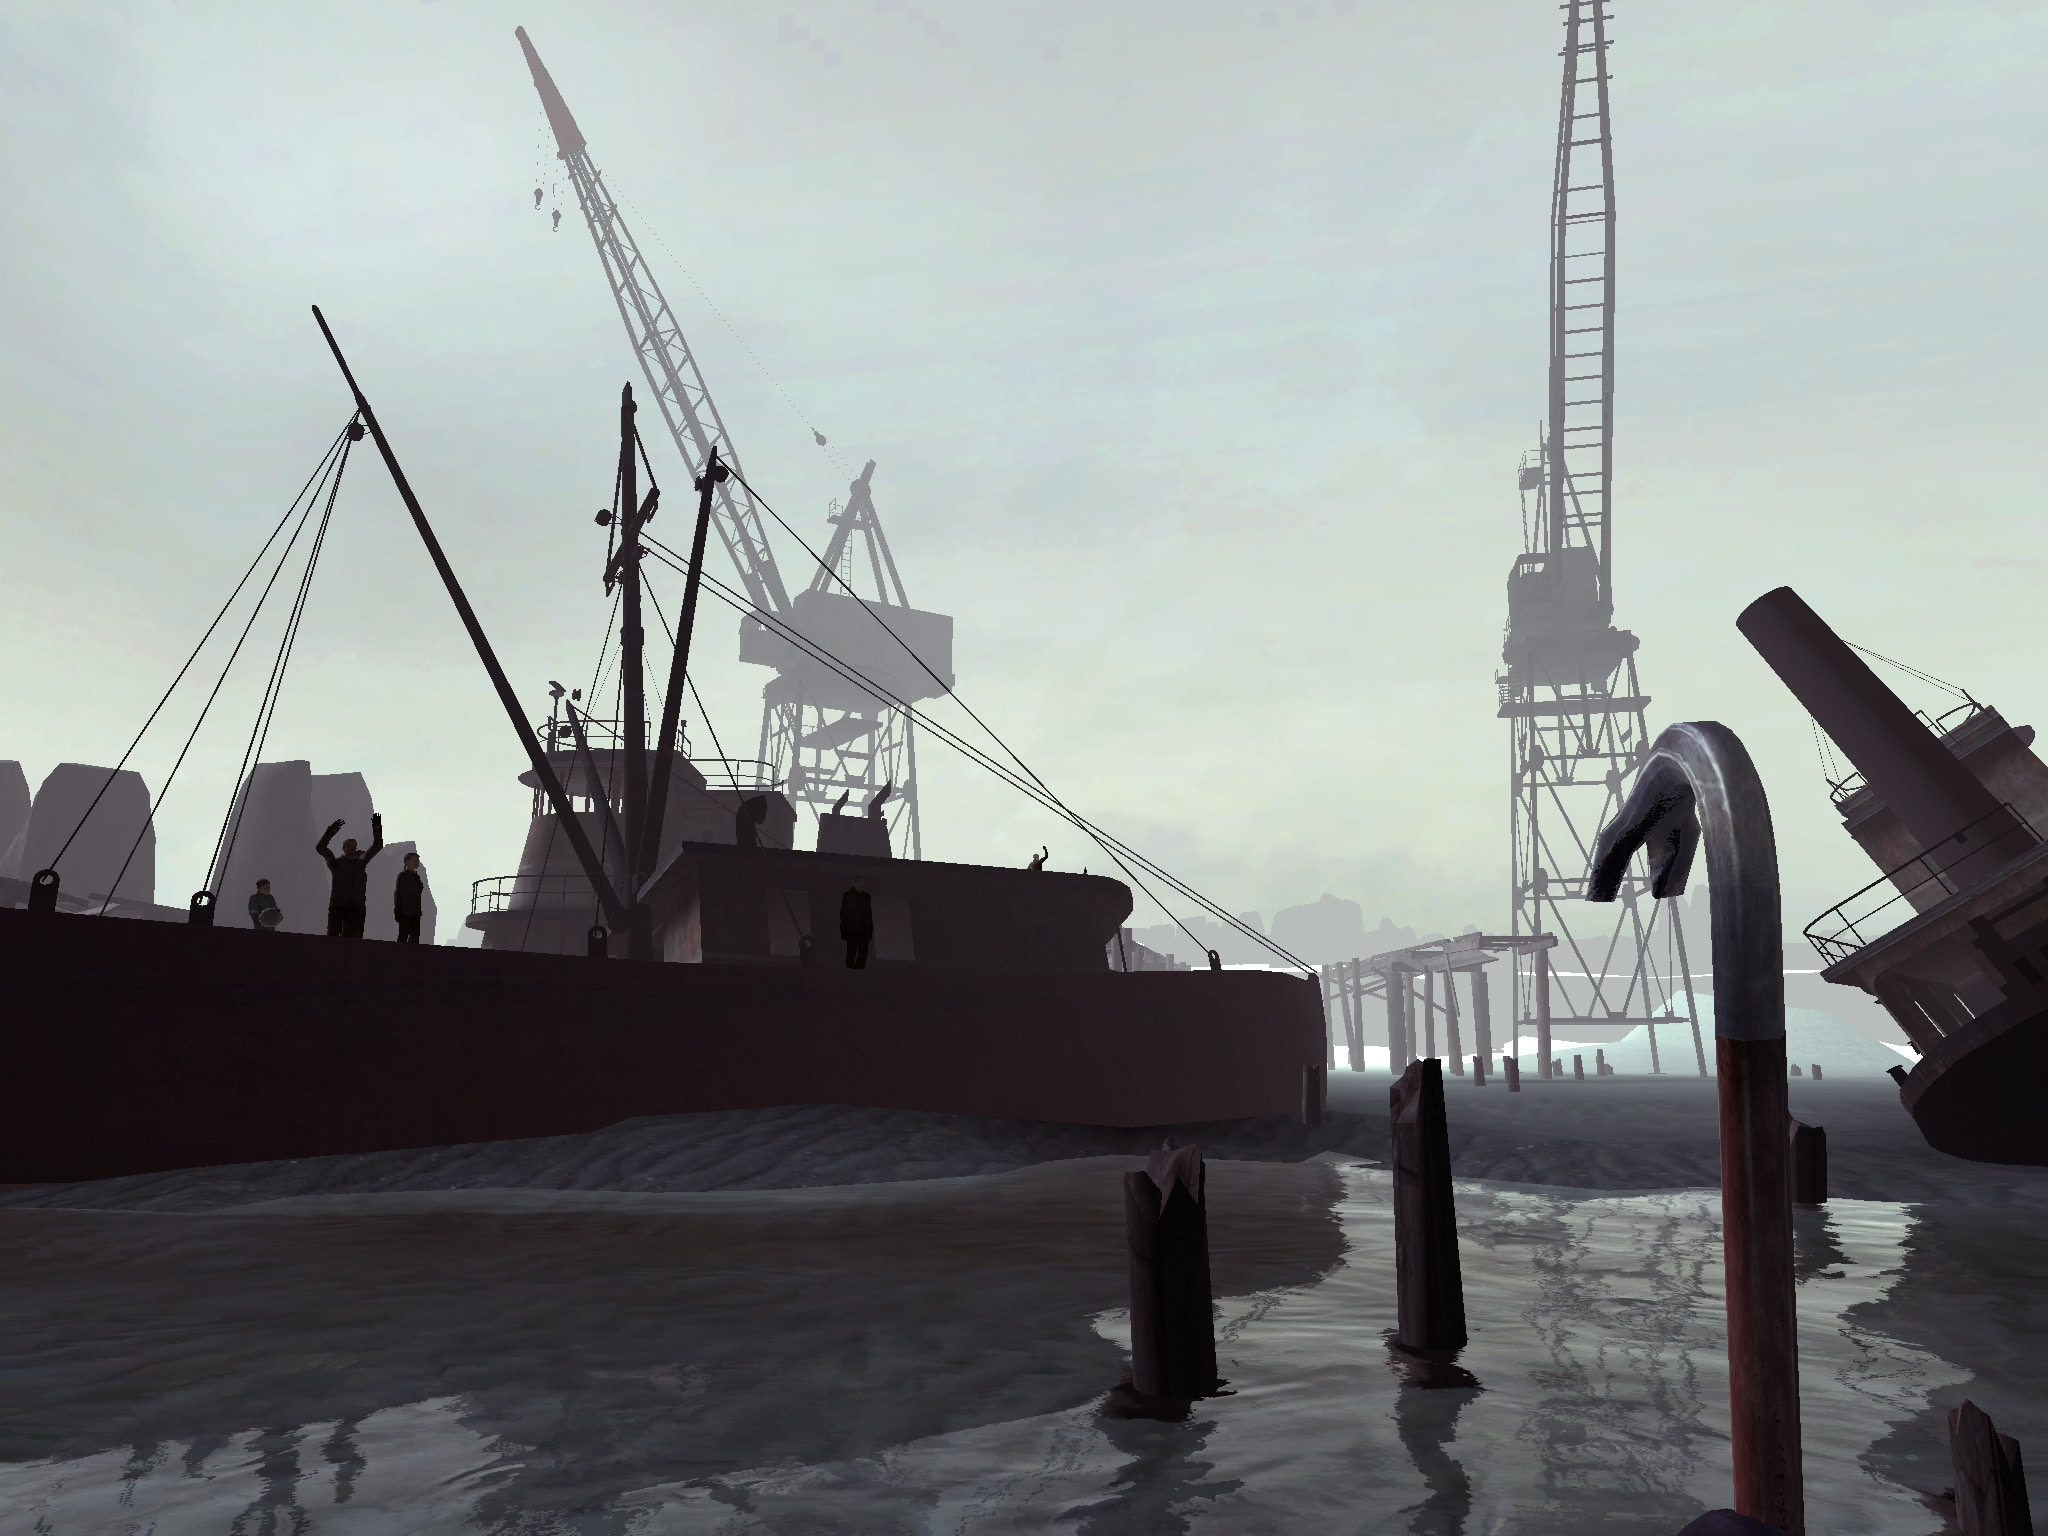 The player, holding a crowbar, oversees a dried-up dock with beached ships, one of which contains a few civilians and a child, and cranes in the background.